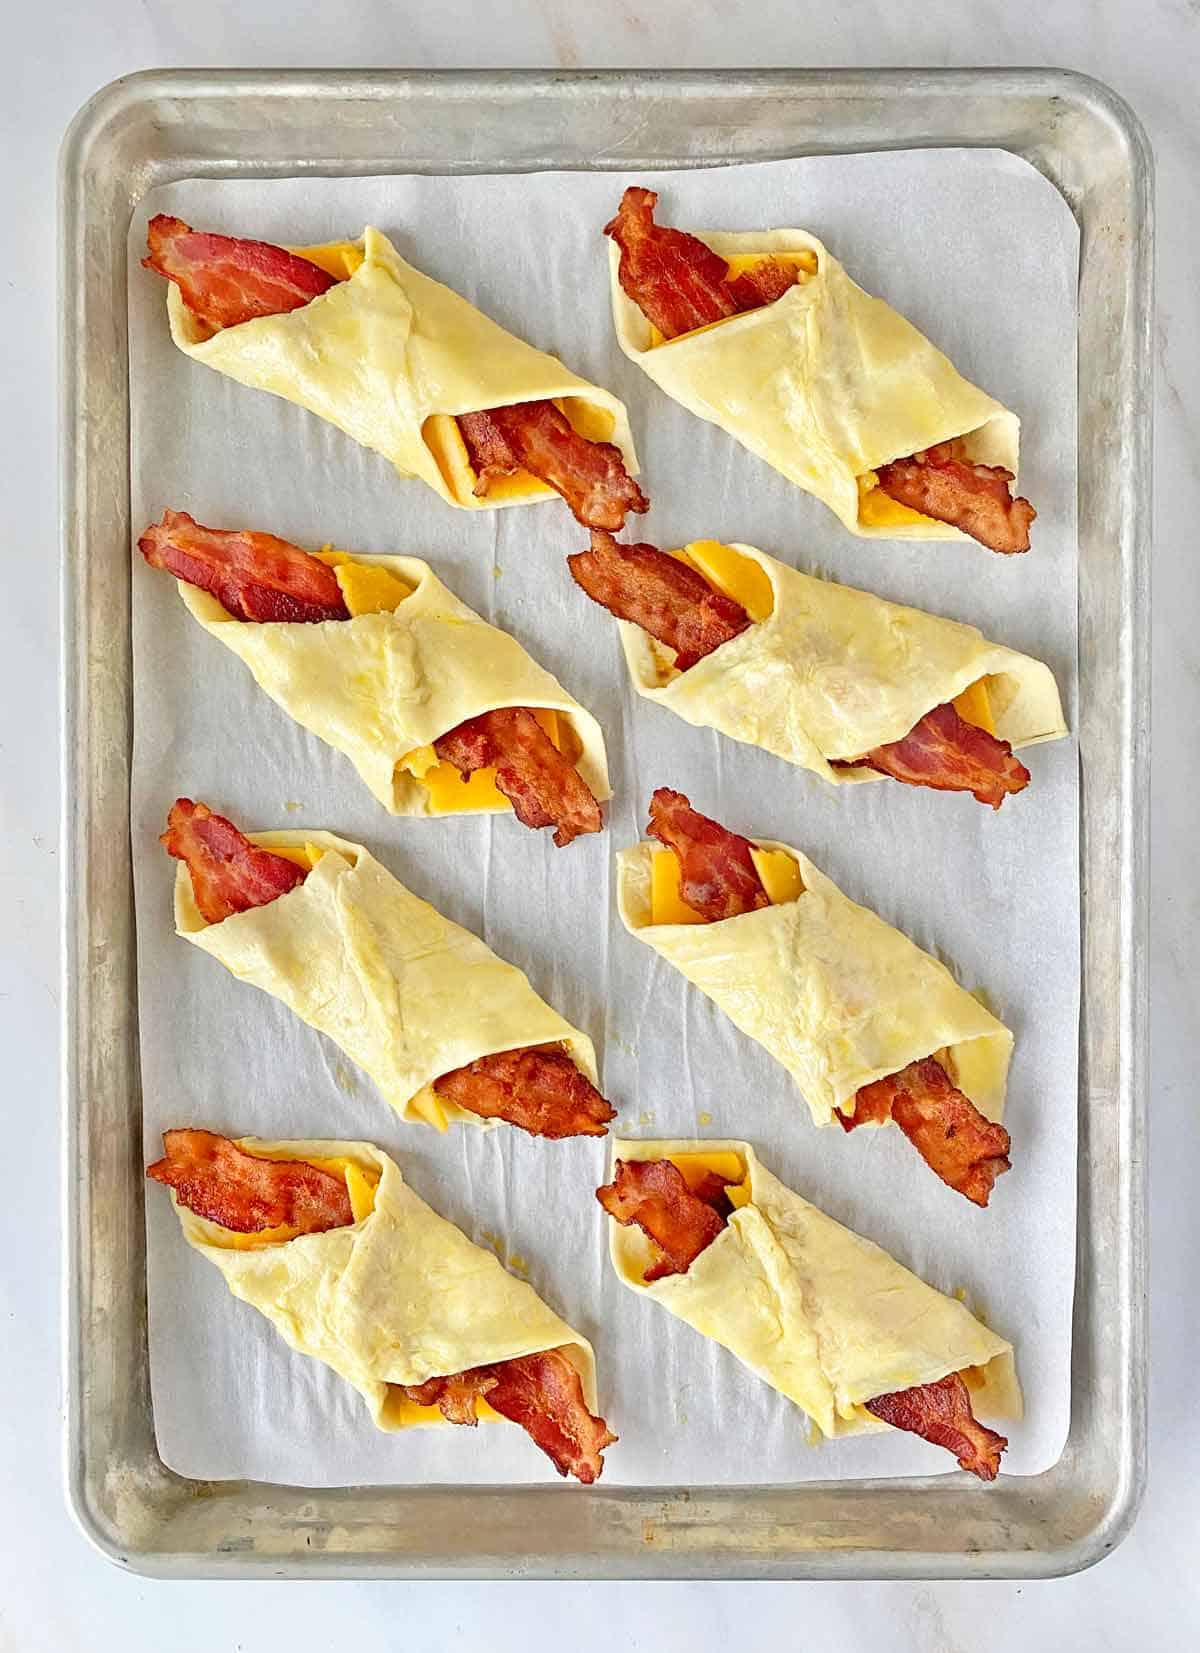 Unbaked cheese bacon turnovers on a cookie sheet.